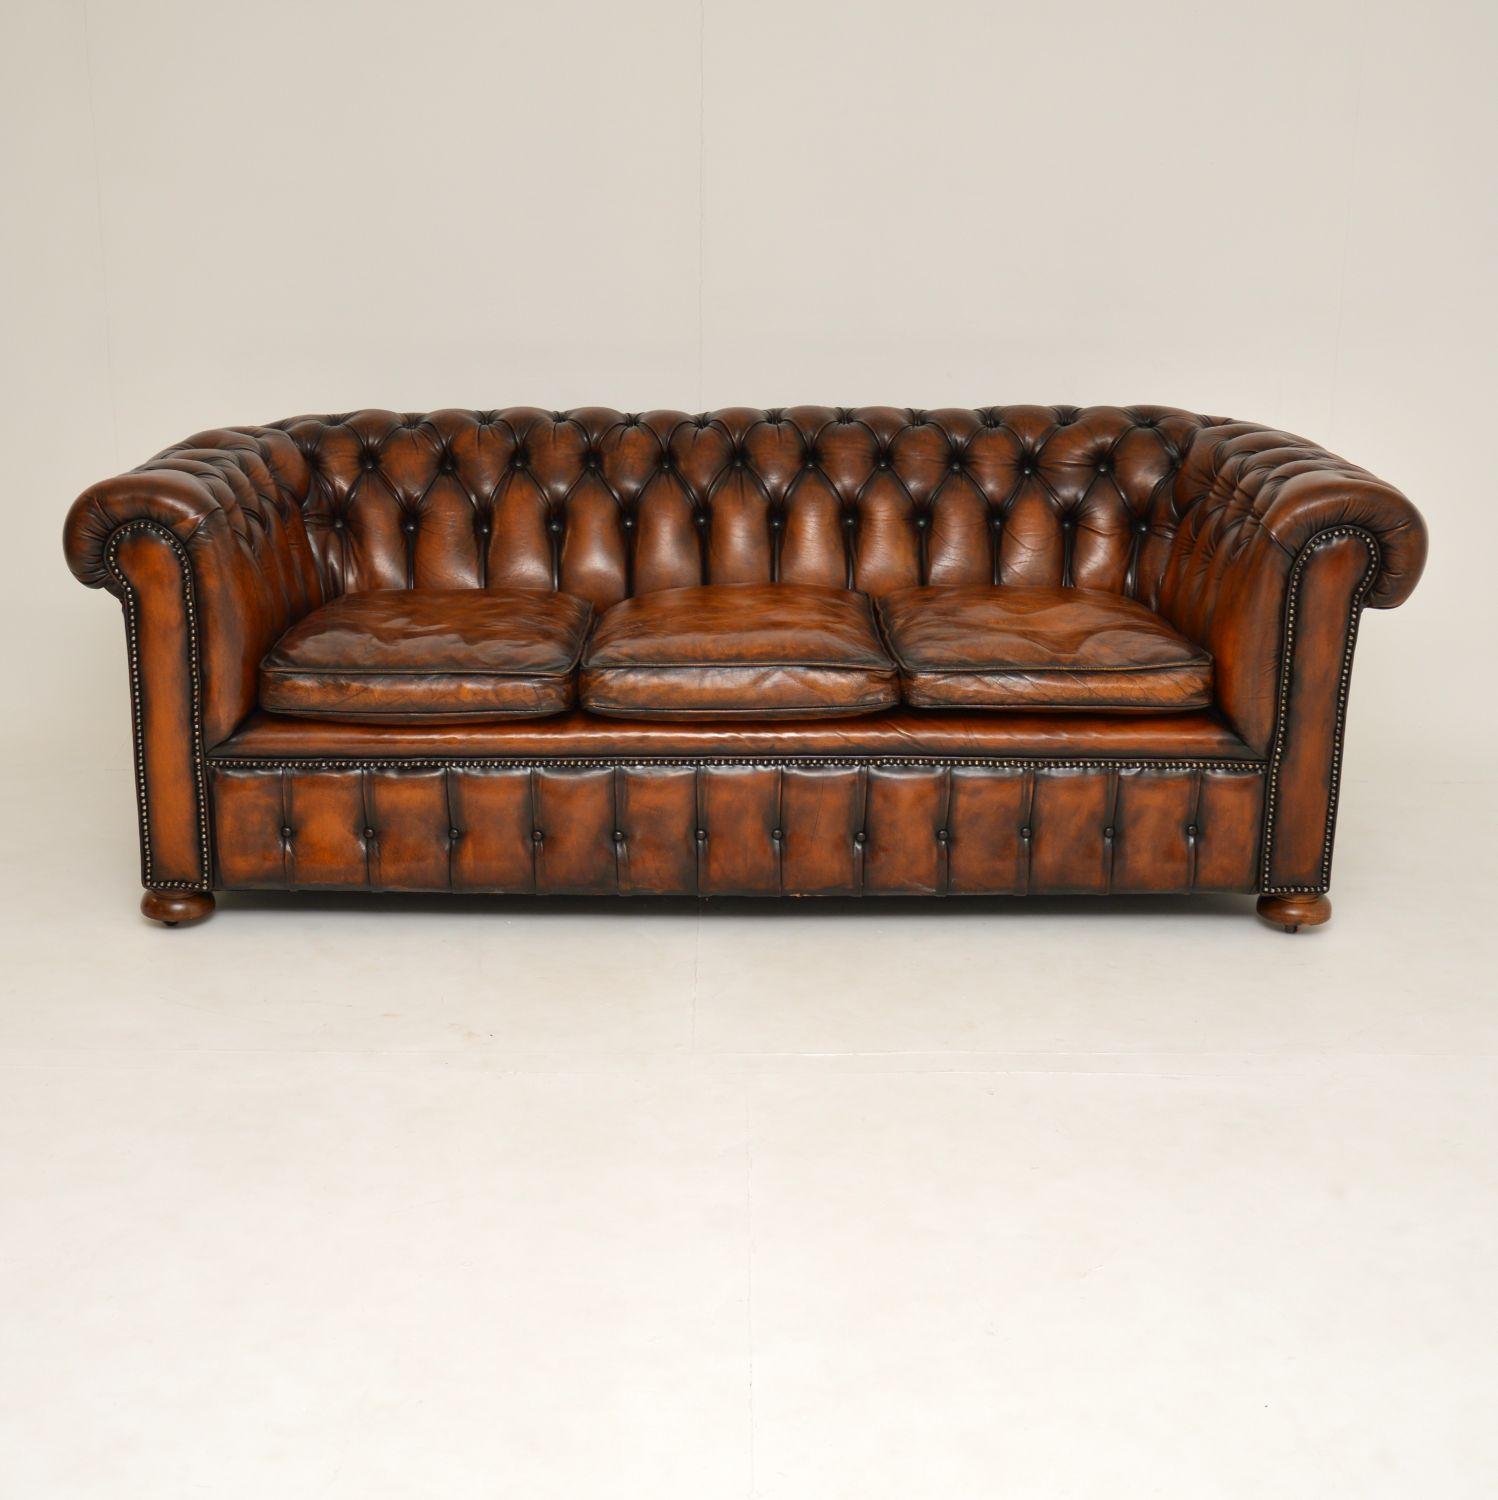 A smart and stylish vintage Chesterfield three-seat sofa, upholstered in gorgeous original deep buttoned leather.

This is of excellent quality, it’s very well made in the classic Victorian style. This dates from around the 1950s-1960s.

We have